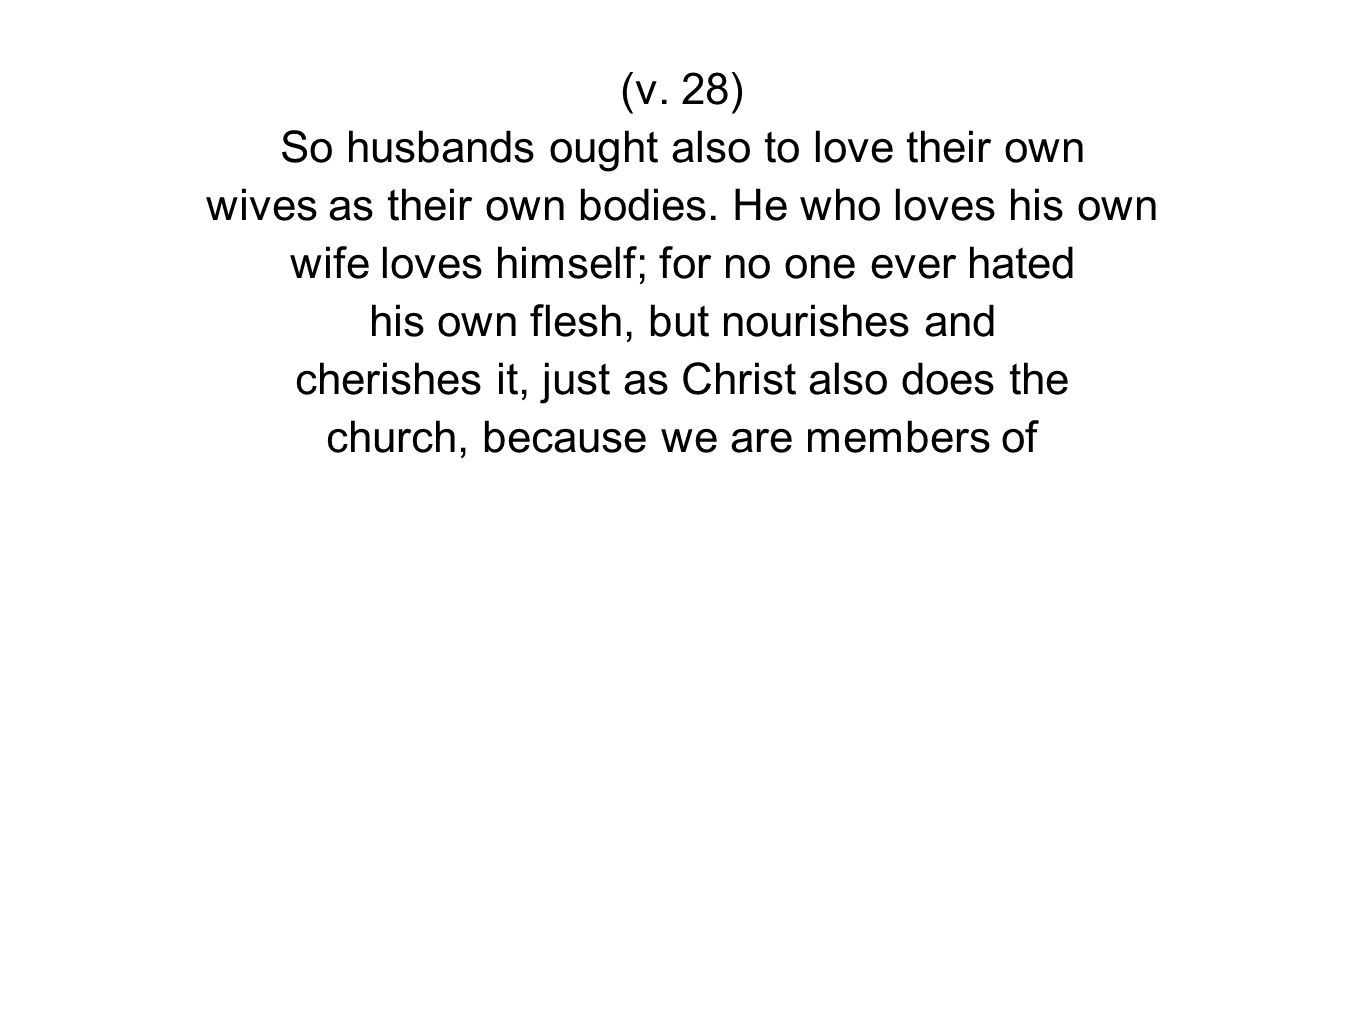 (v. 28) So husbands ought also to love their own wives as their own bodies.